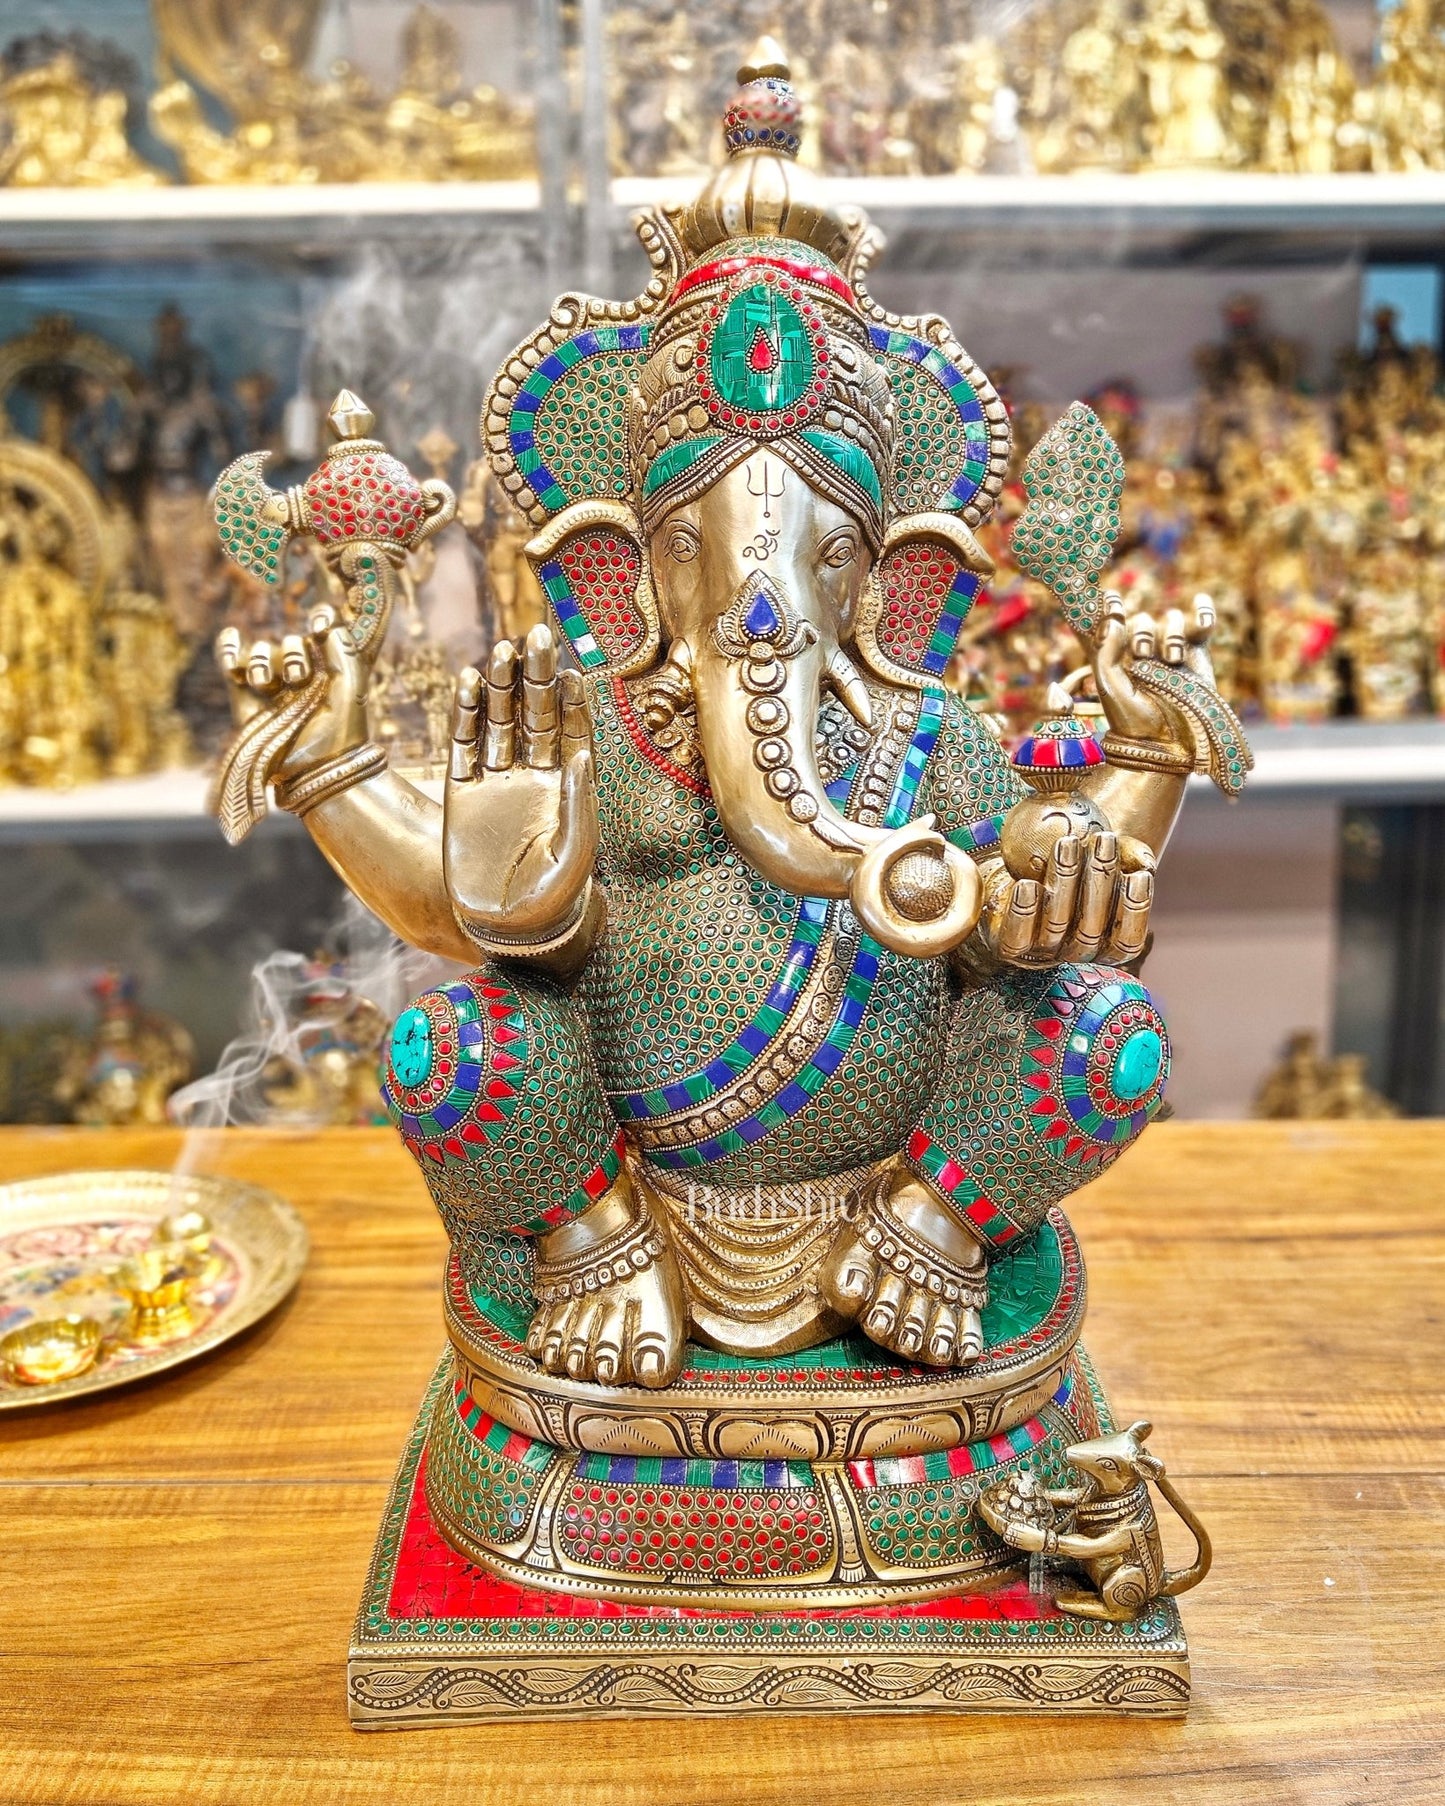 Handcrafted Brass Ganapati Statue - 24" Height - Budhshiv.com